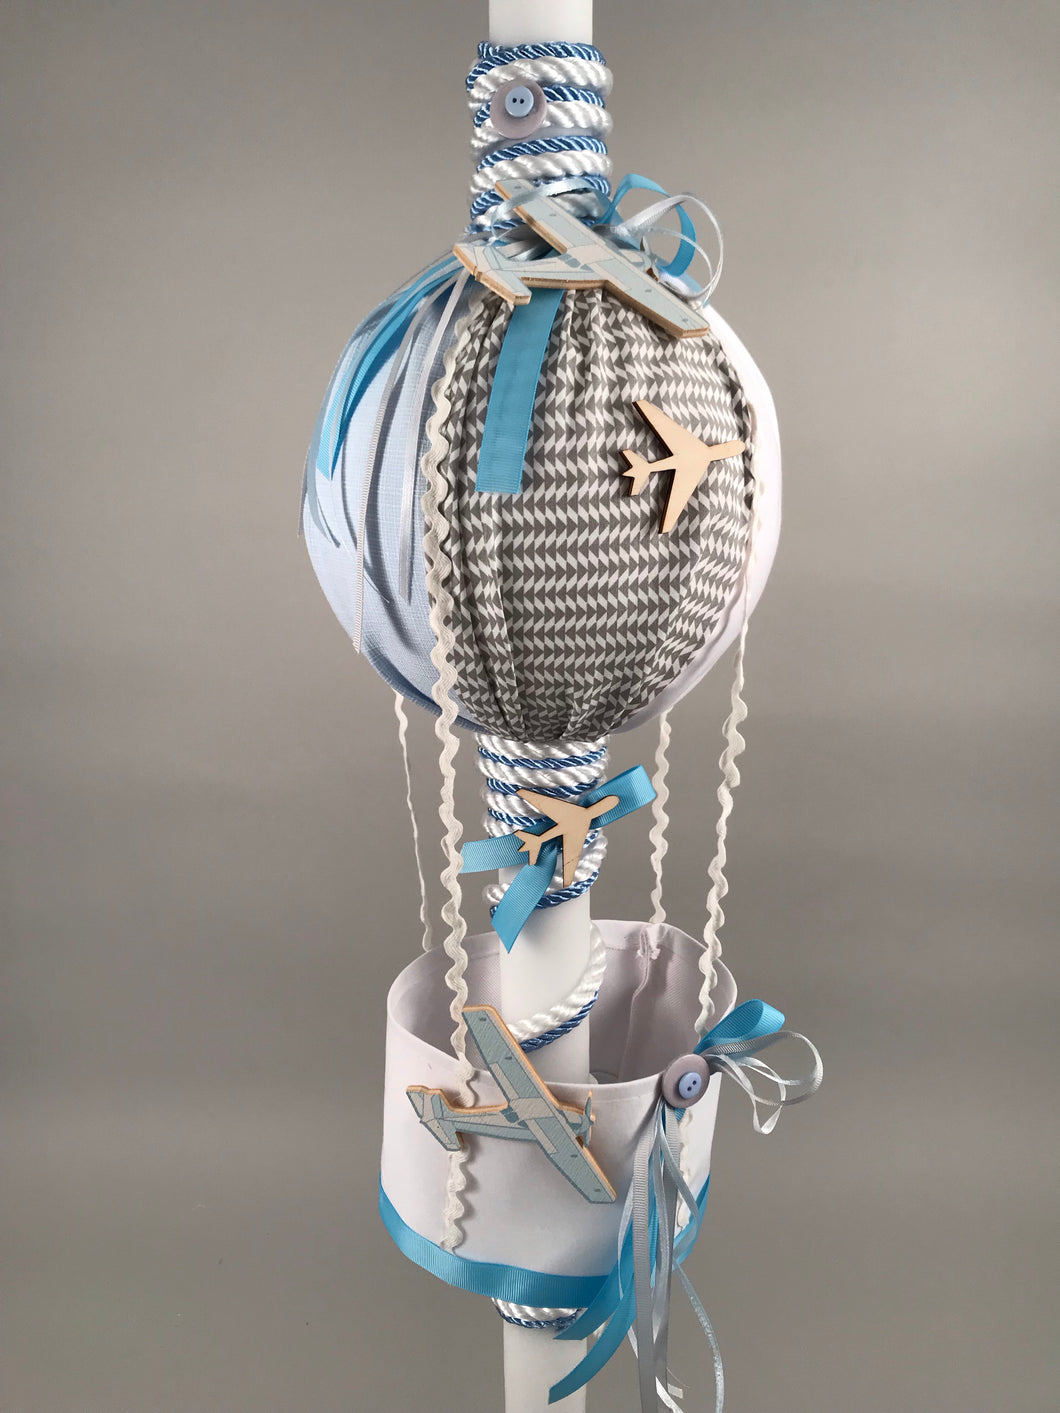 Hot Air Ballon 32” Baptismal Candle Light Blue and Grey with Wooden Accents C20222